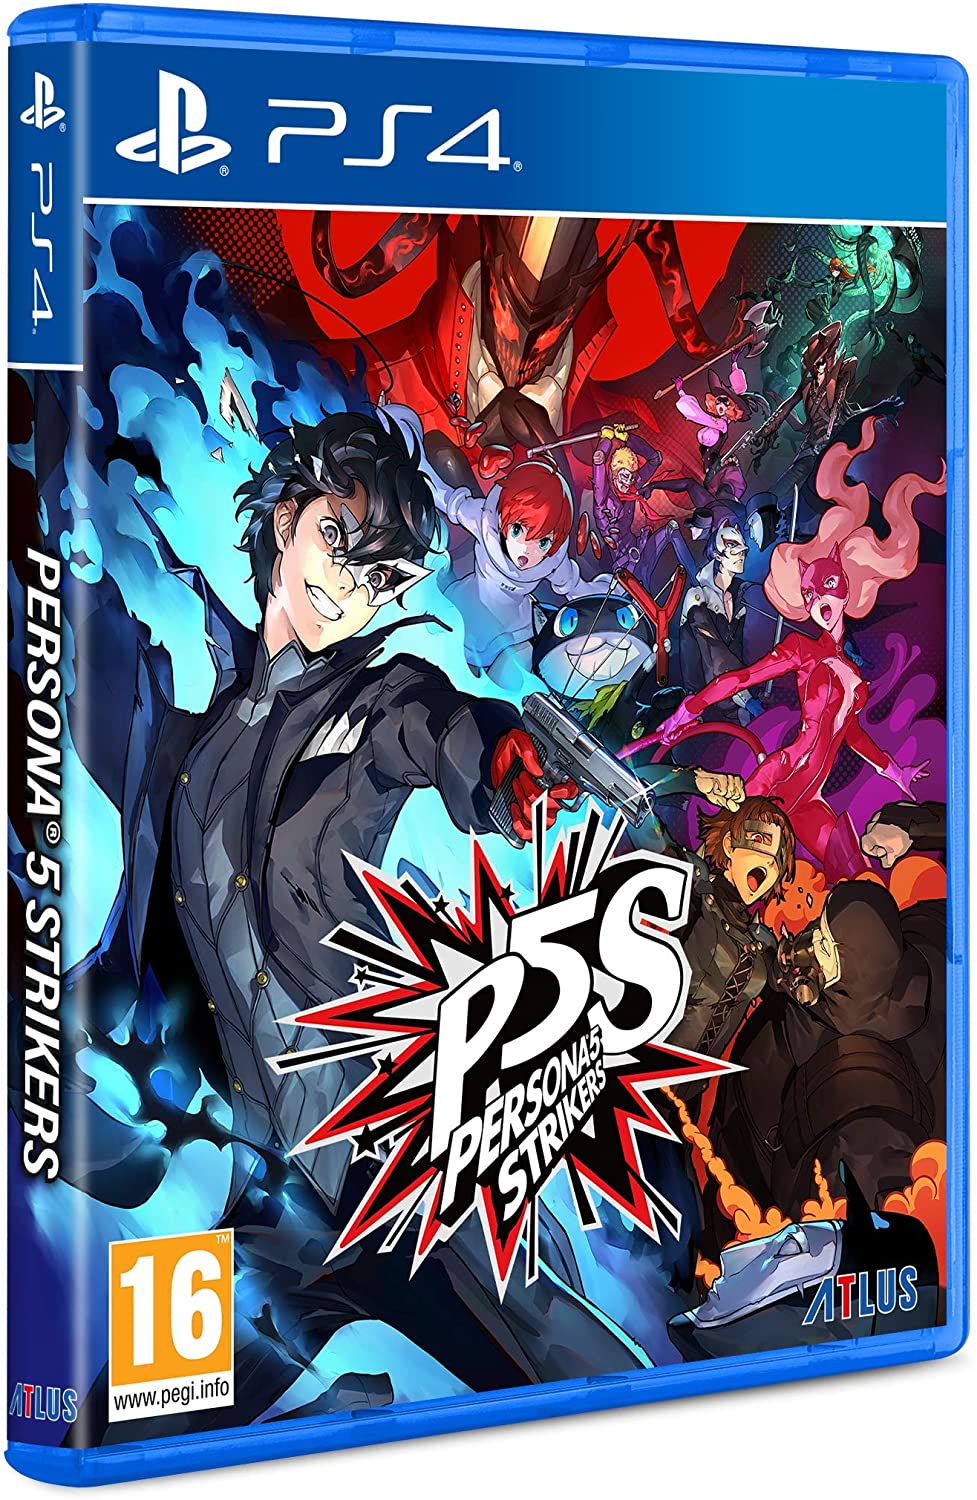 PERSONA 5 STRIKERS PS4